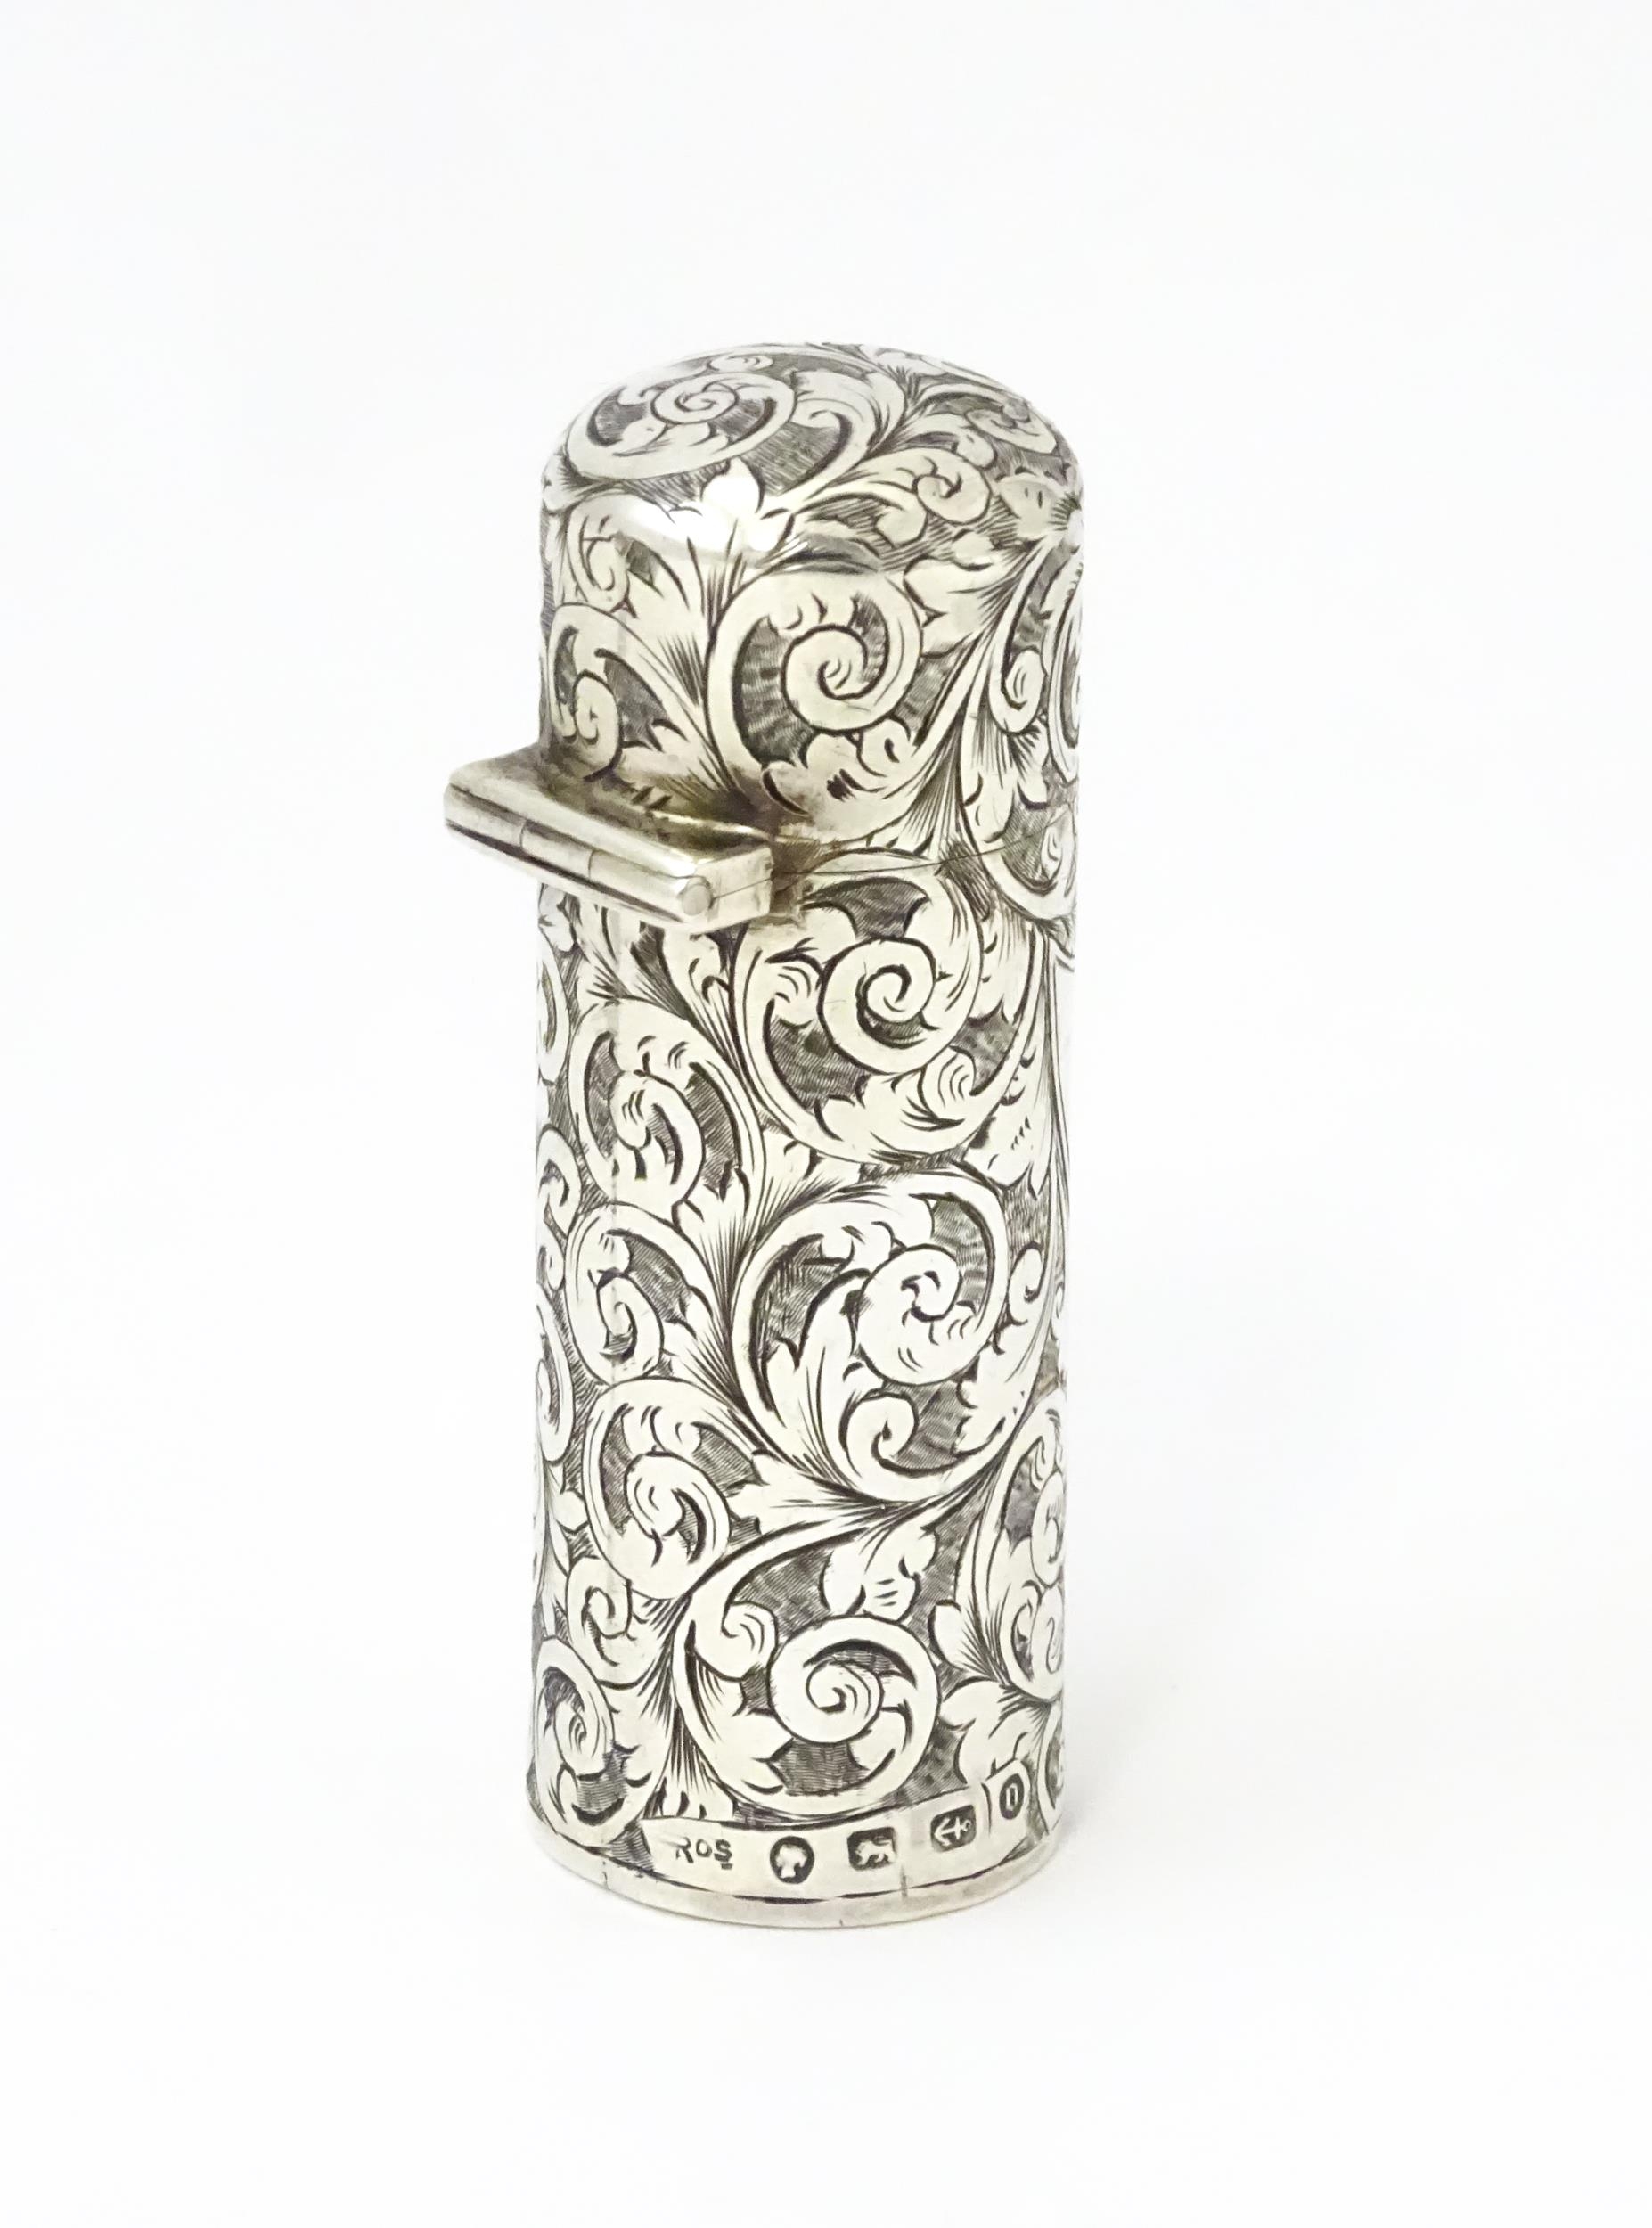 A silver scent / perfume bottle with engraved decoration opening to reveal gilded interior and - Image 3 of 9